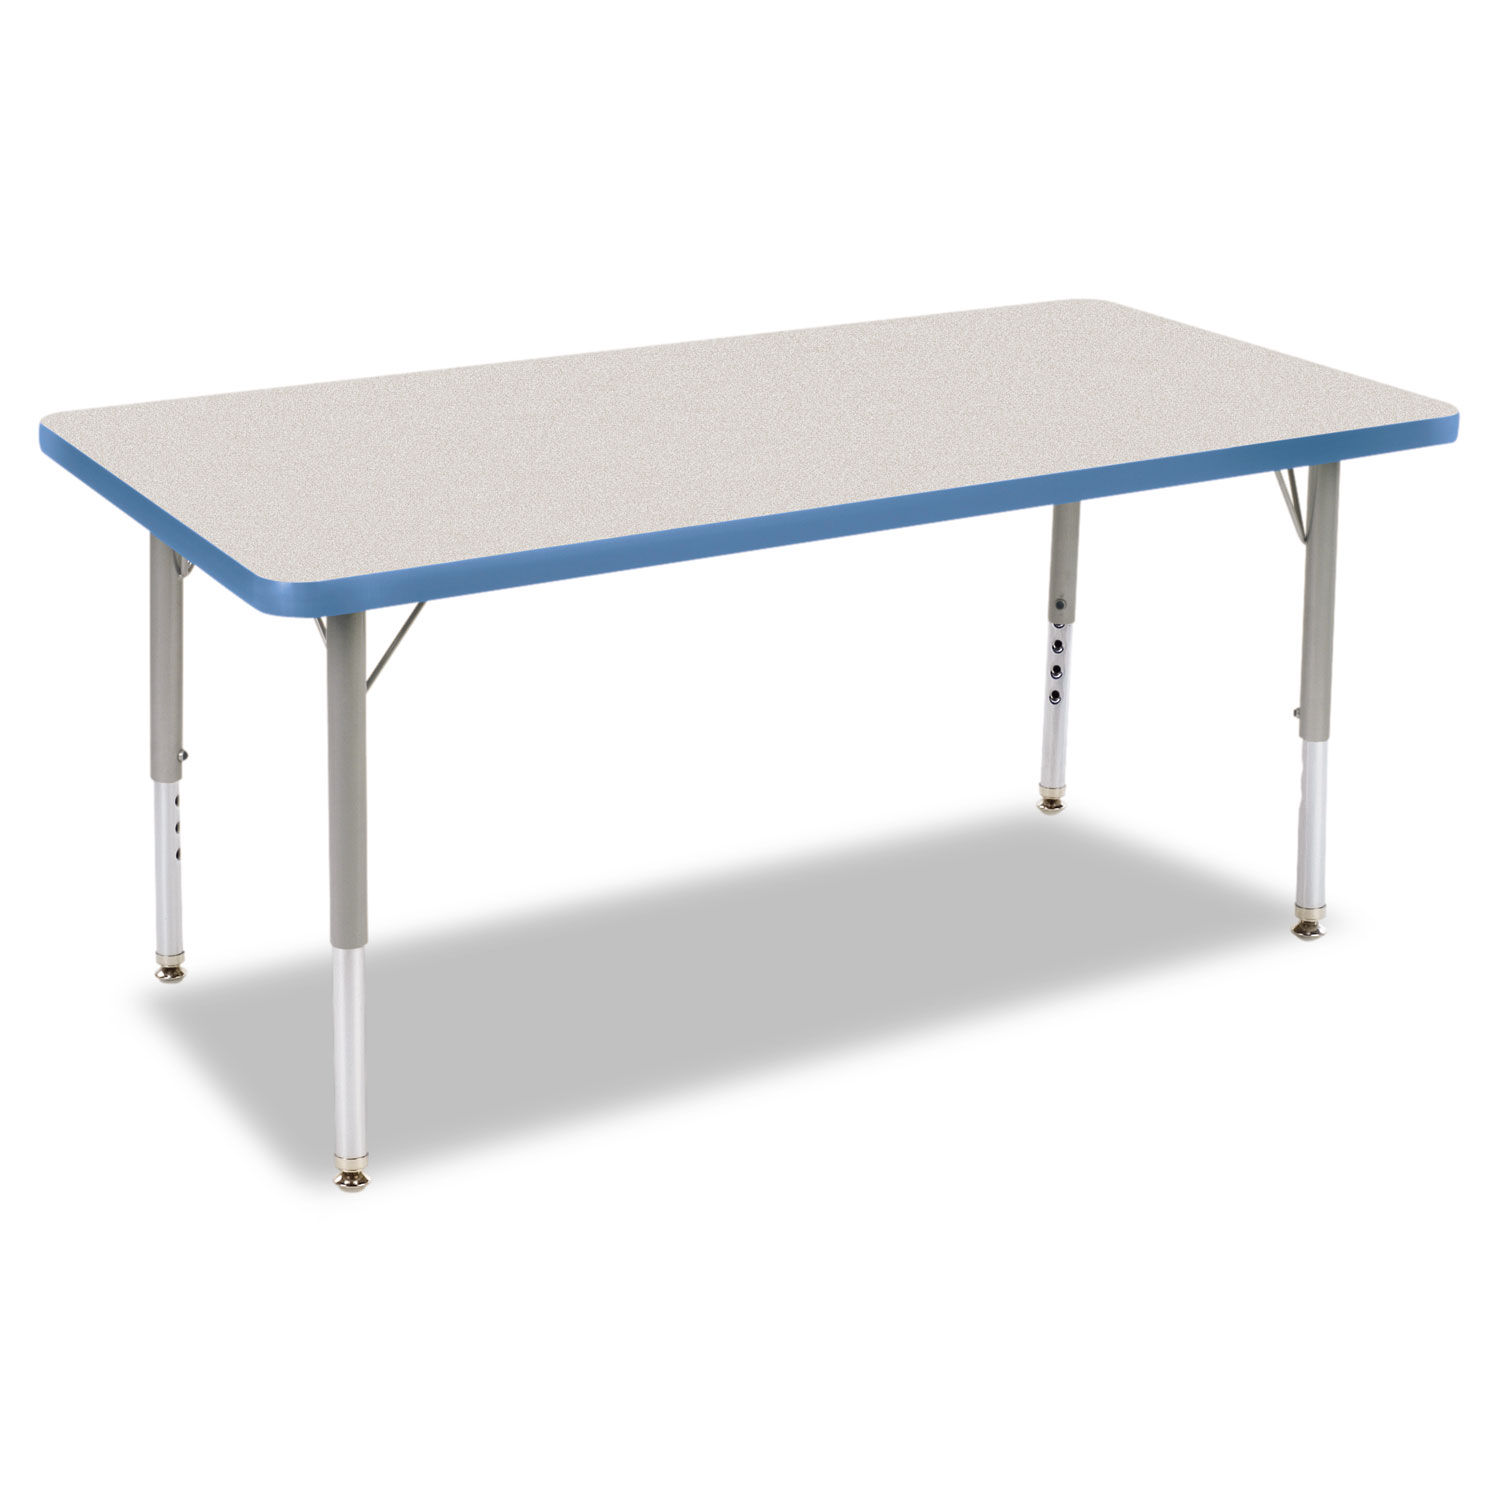 Primary Collection Rectangular Activity Table, 24w x 48d x 25h, Gray Nebula